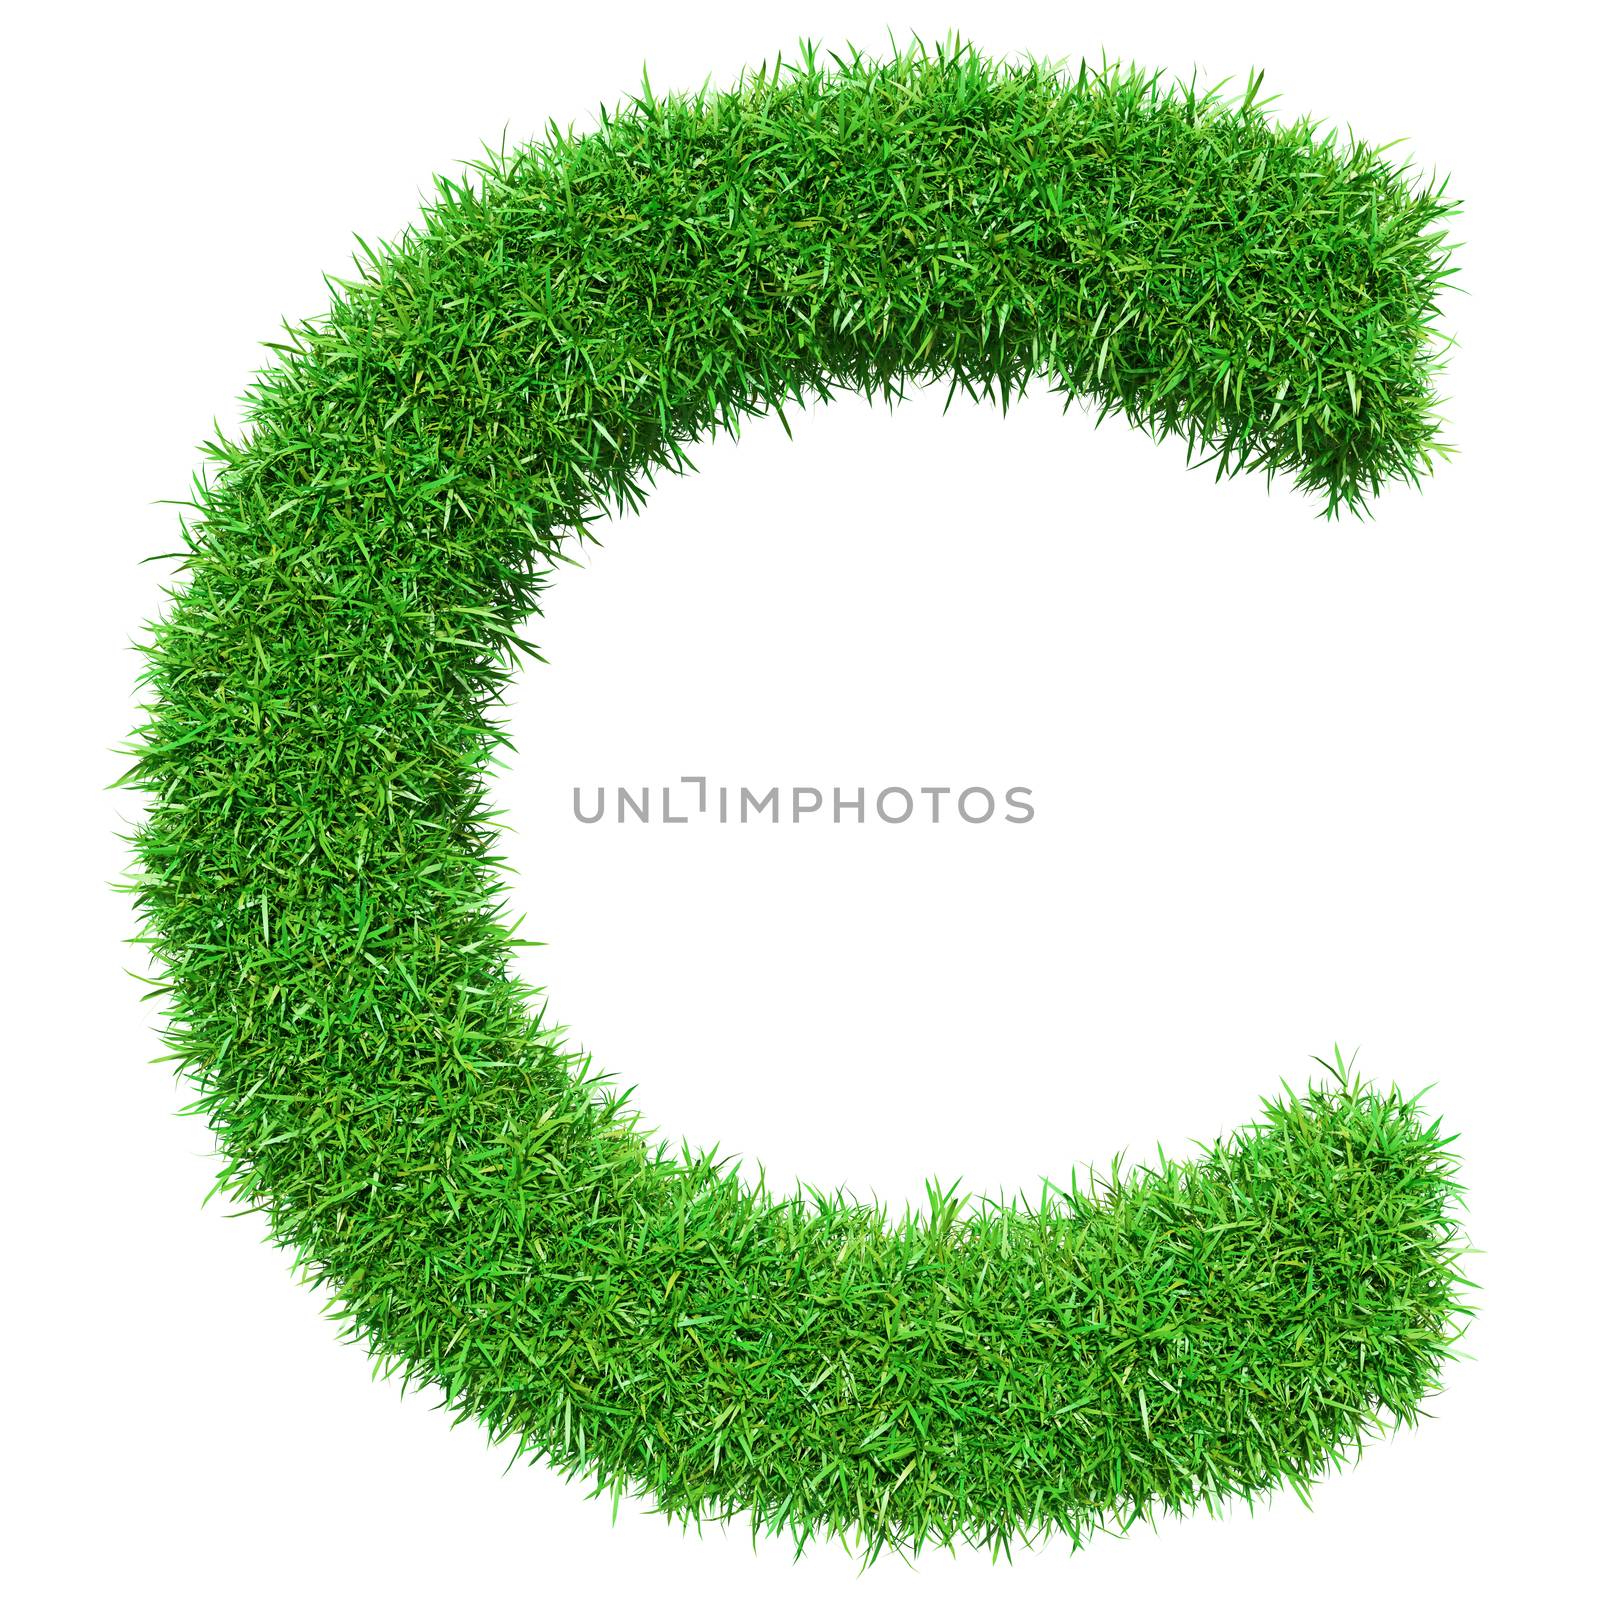 Green Grass Letter C by cherezoff